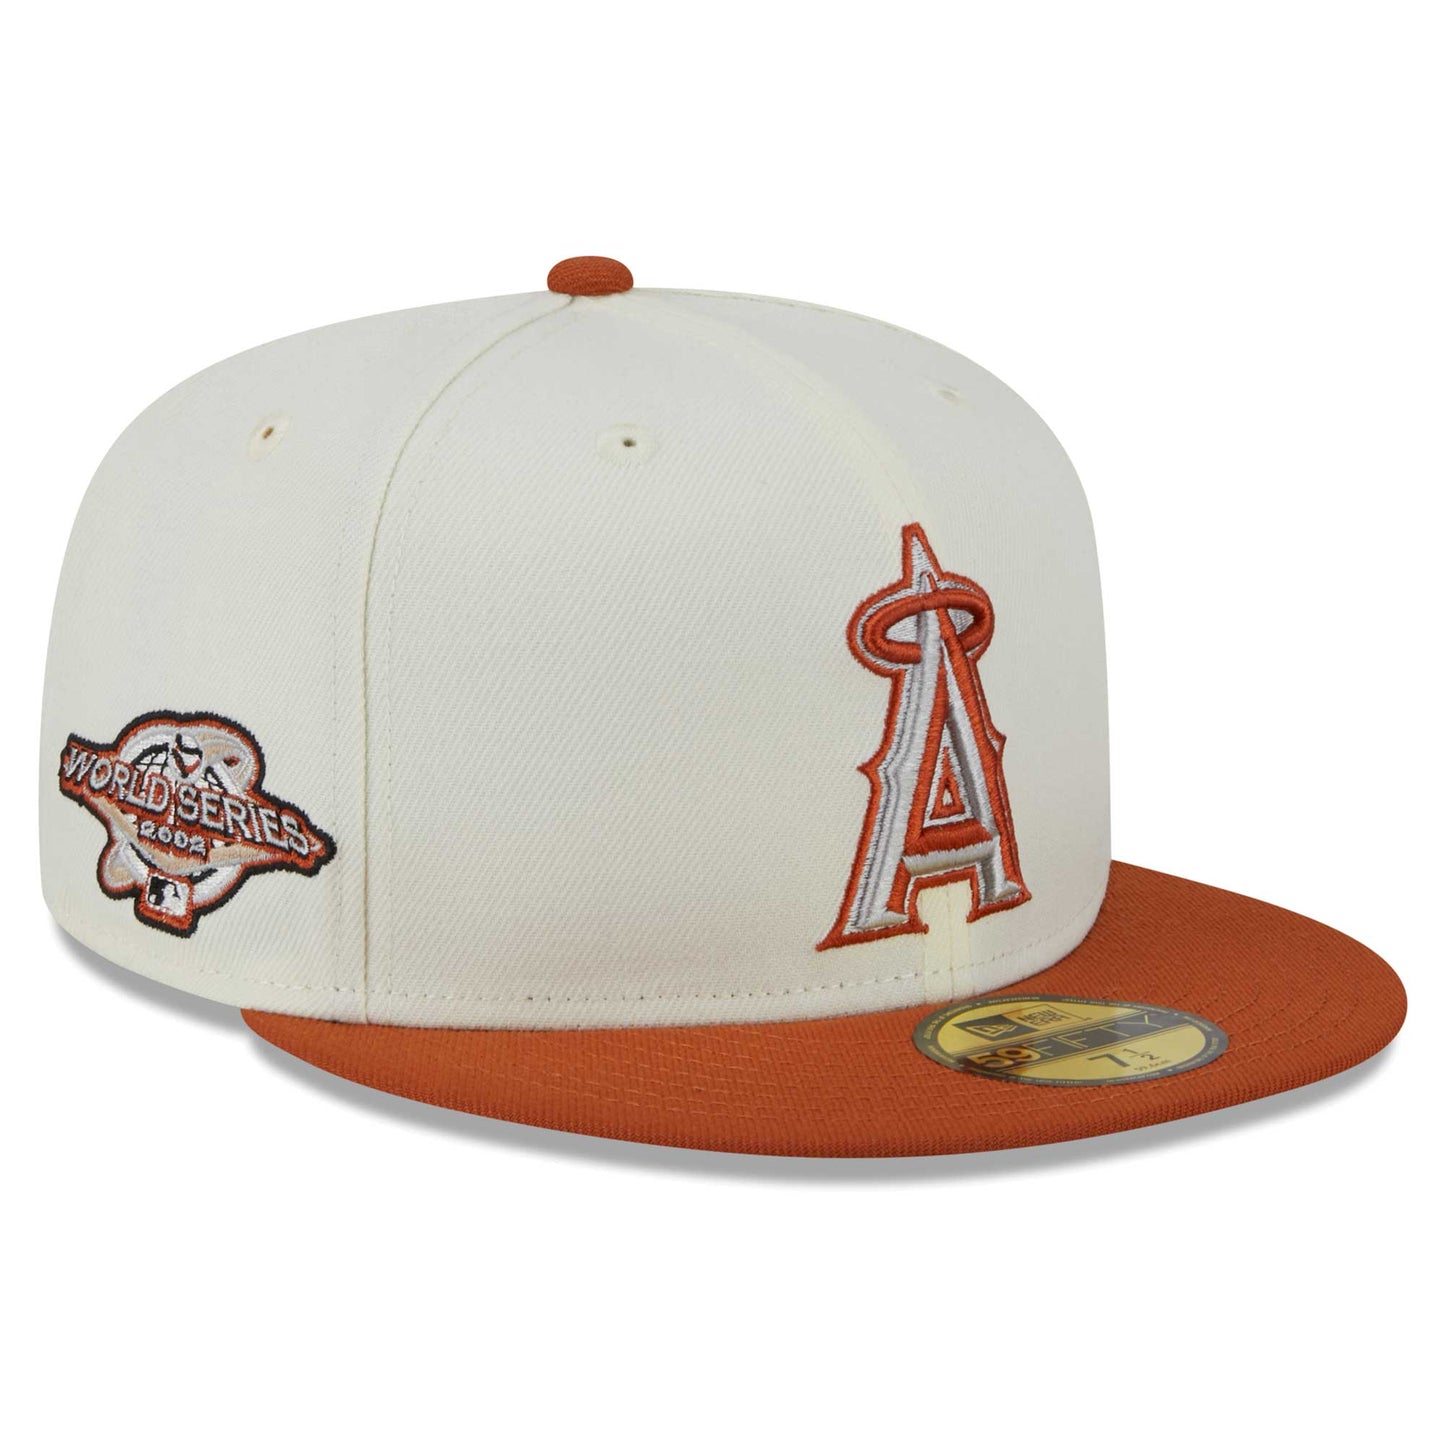 Los Angeles Angels New Era 59FIFTY Fitted Hat - Cream/Orange